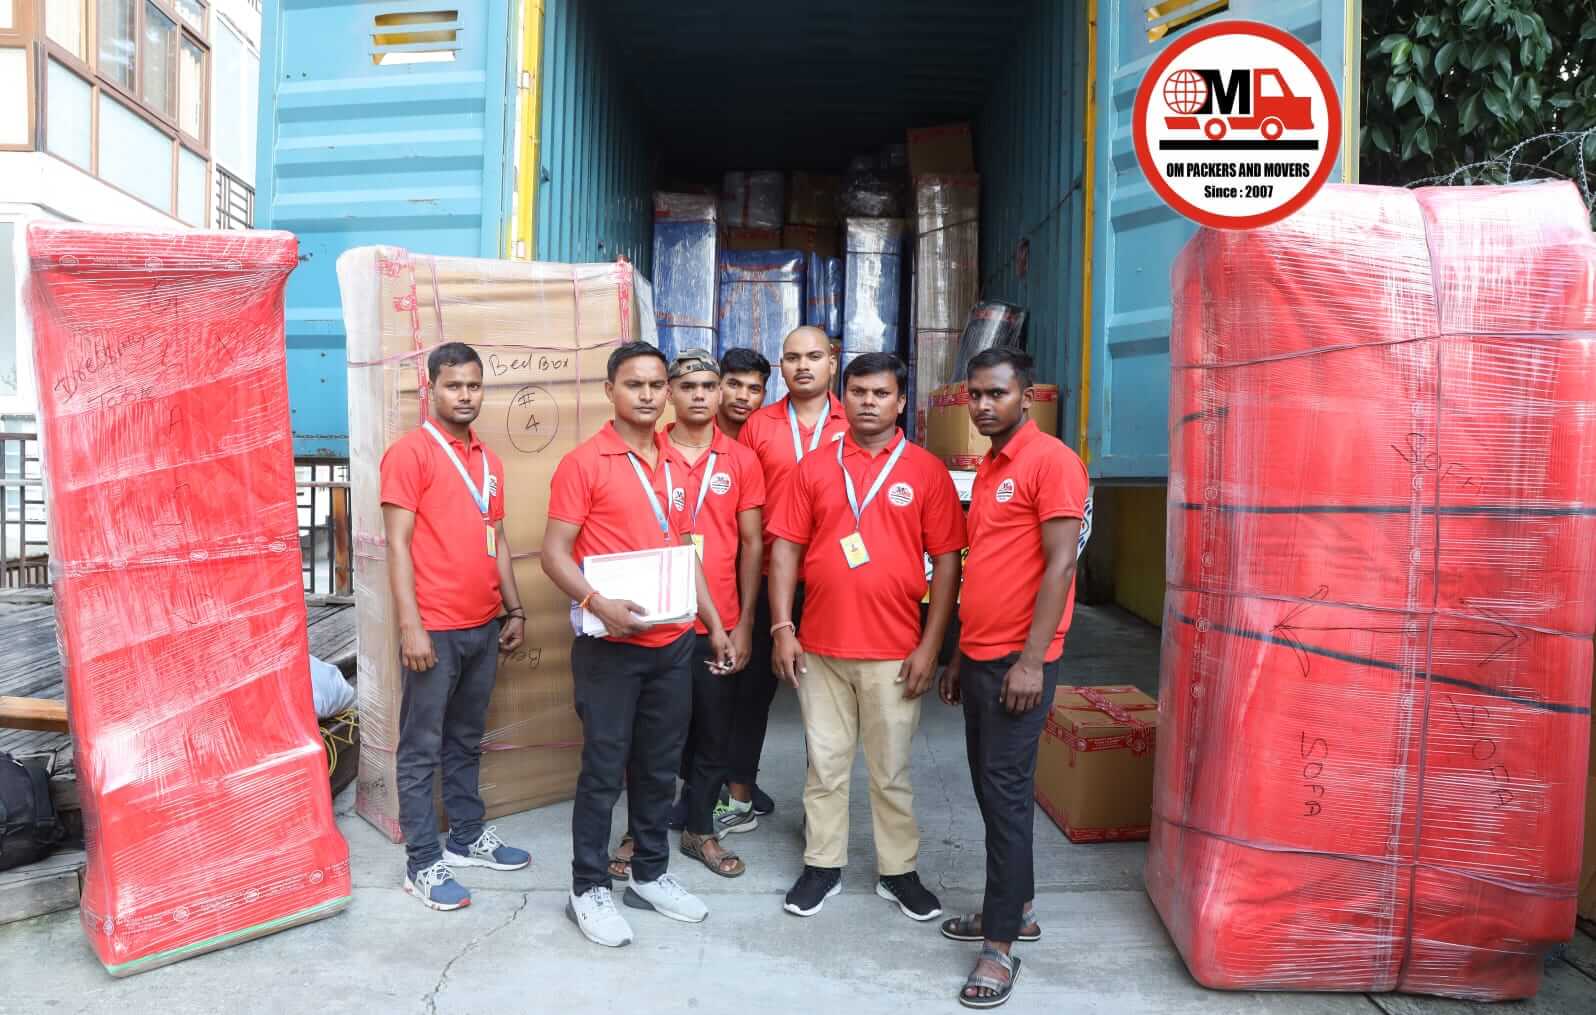 om packers and movers india 10